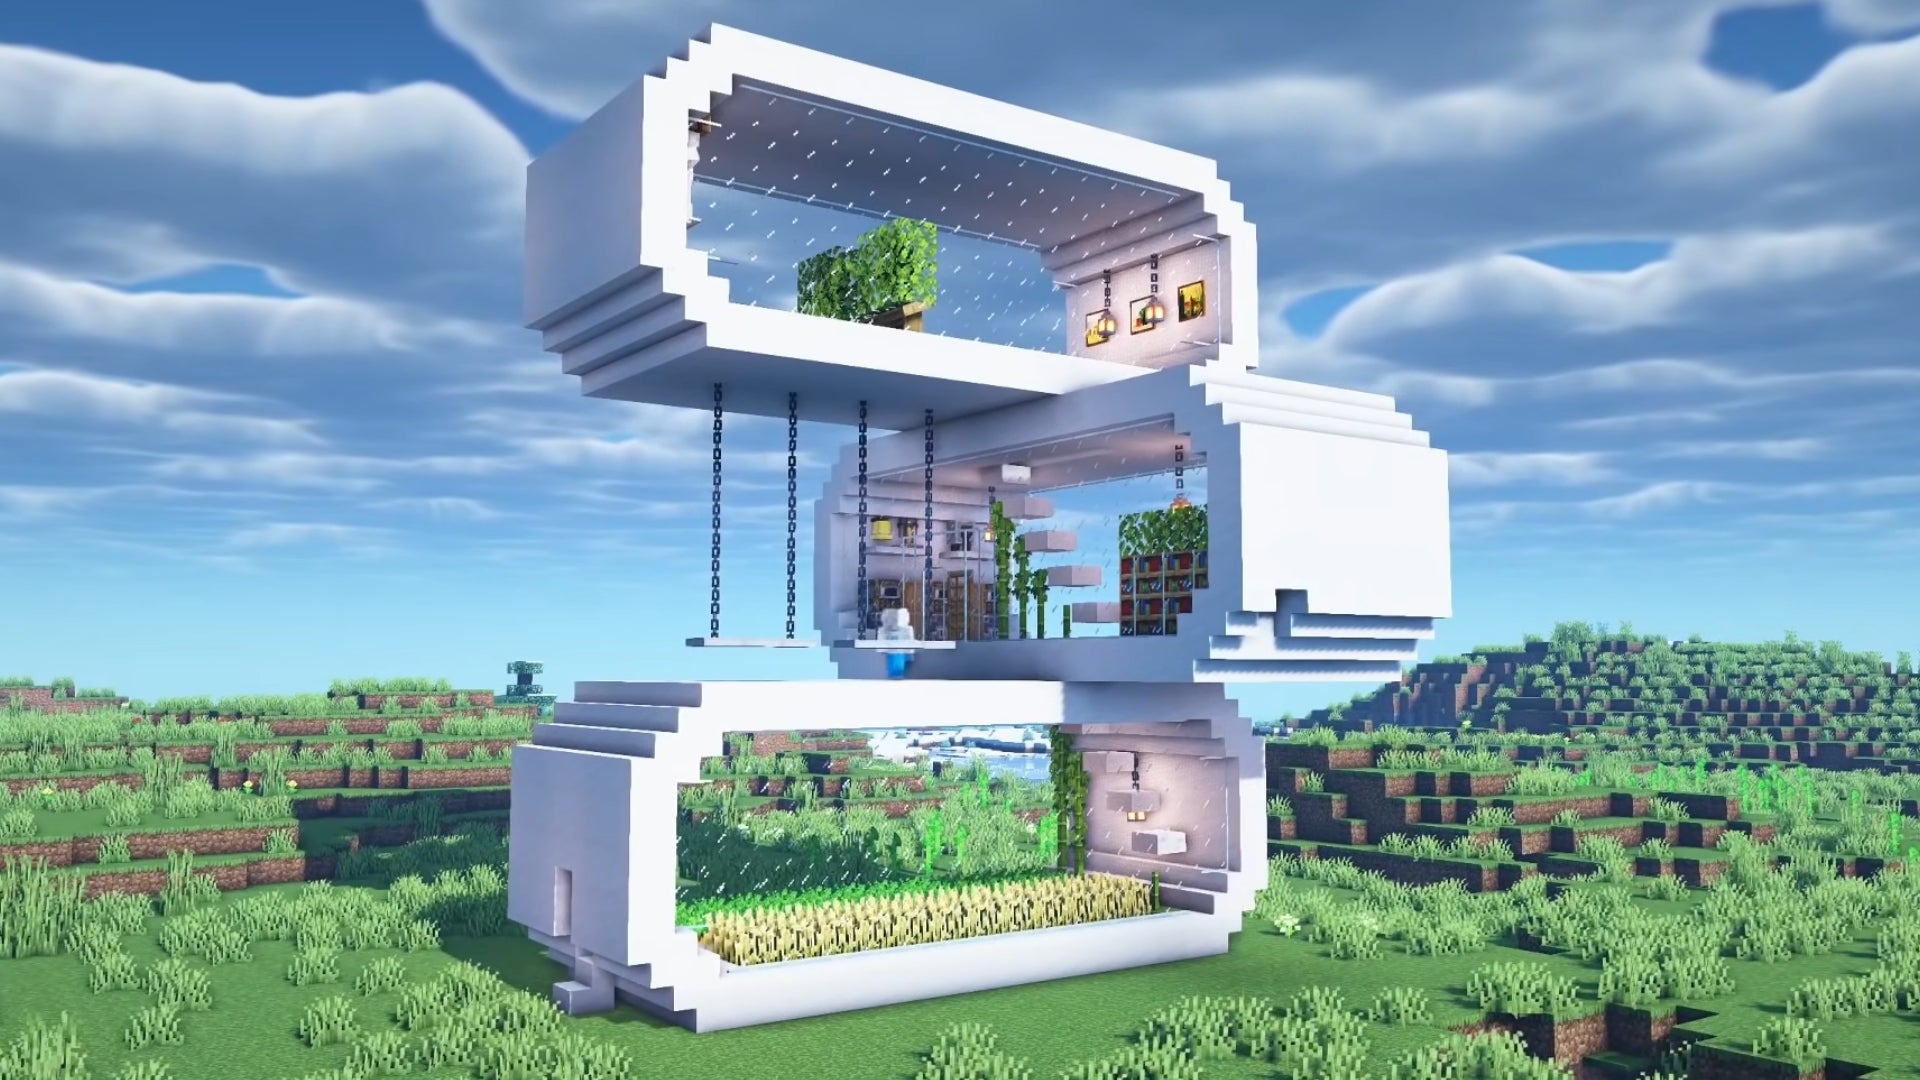 A 3-floor white container house in Minecraft, built by YouTuber ManDooMiN.